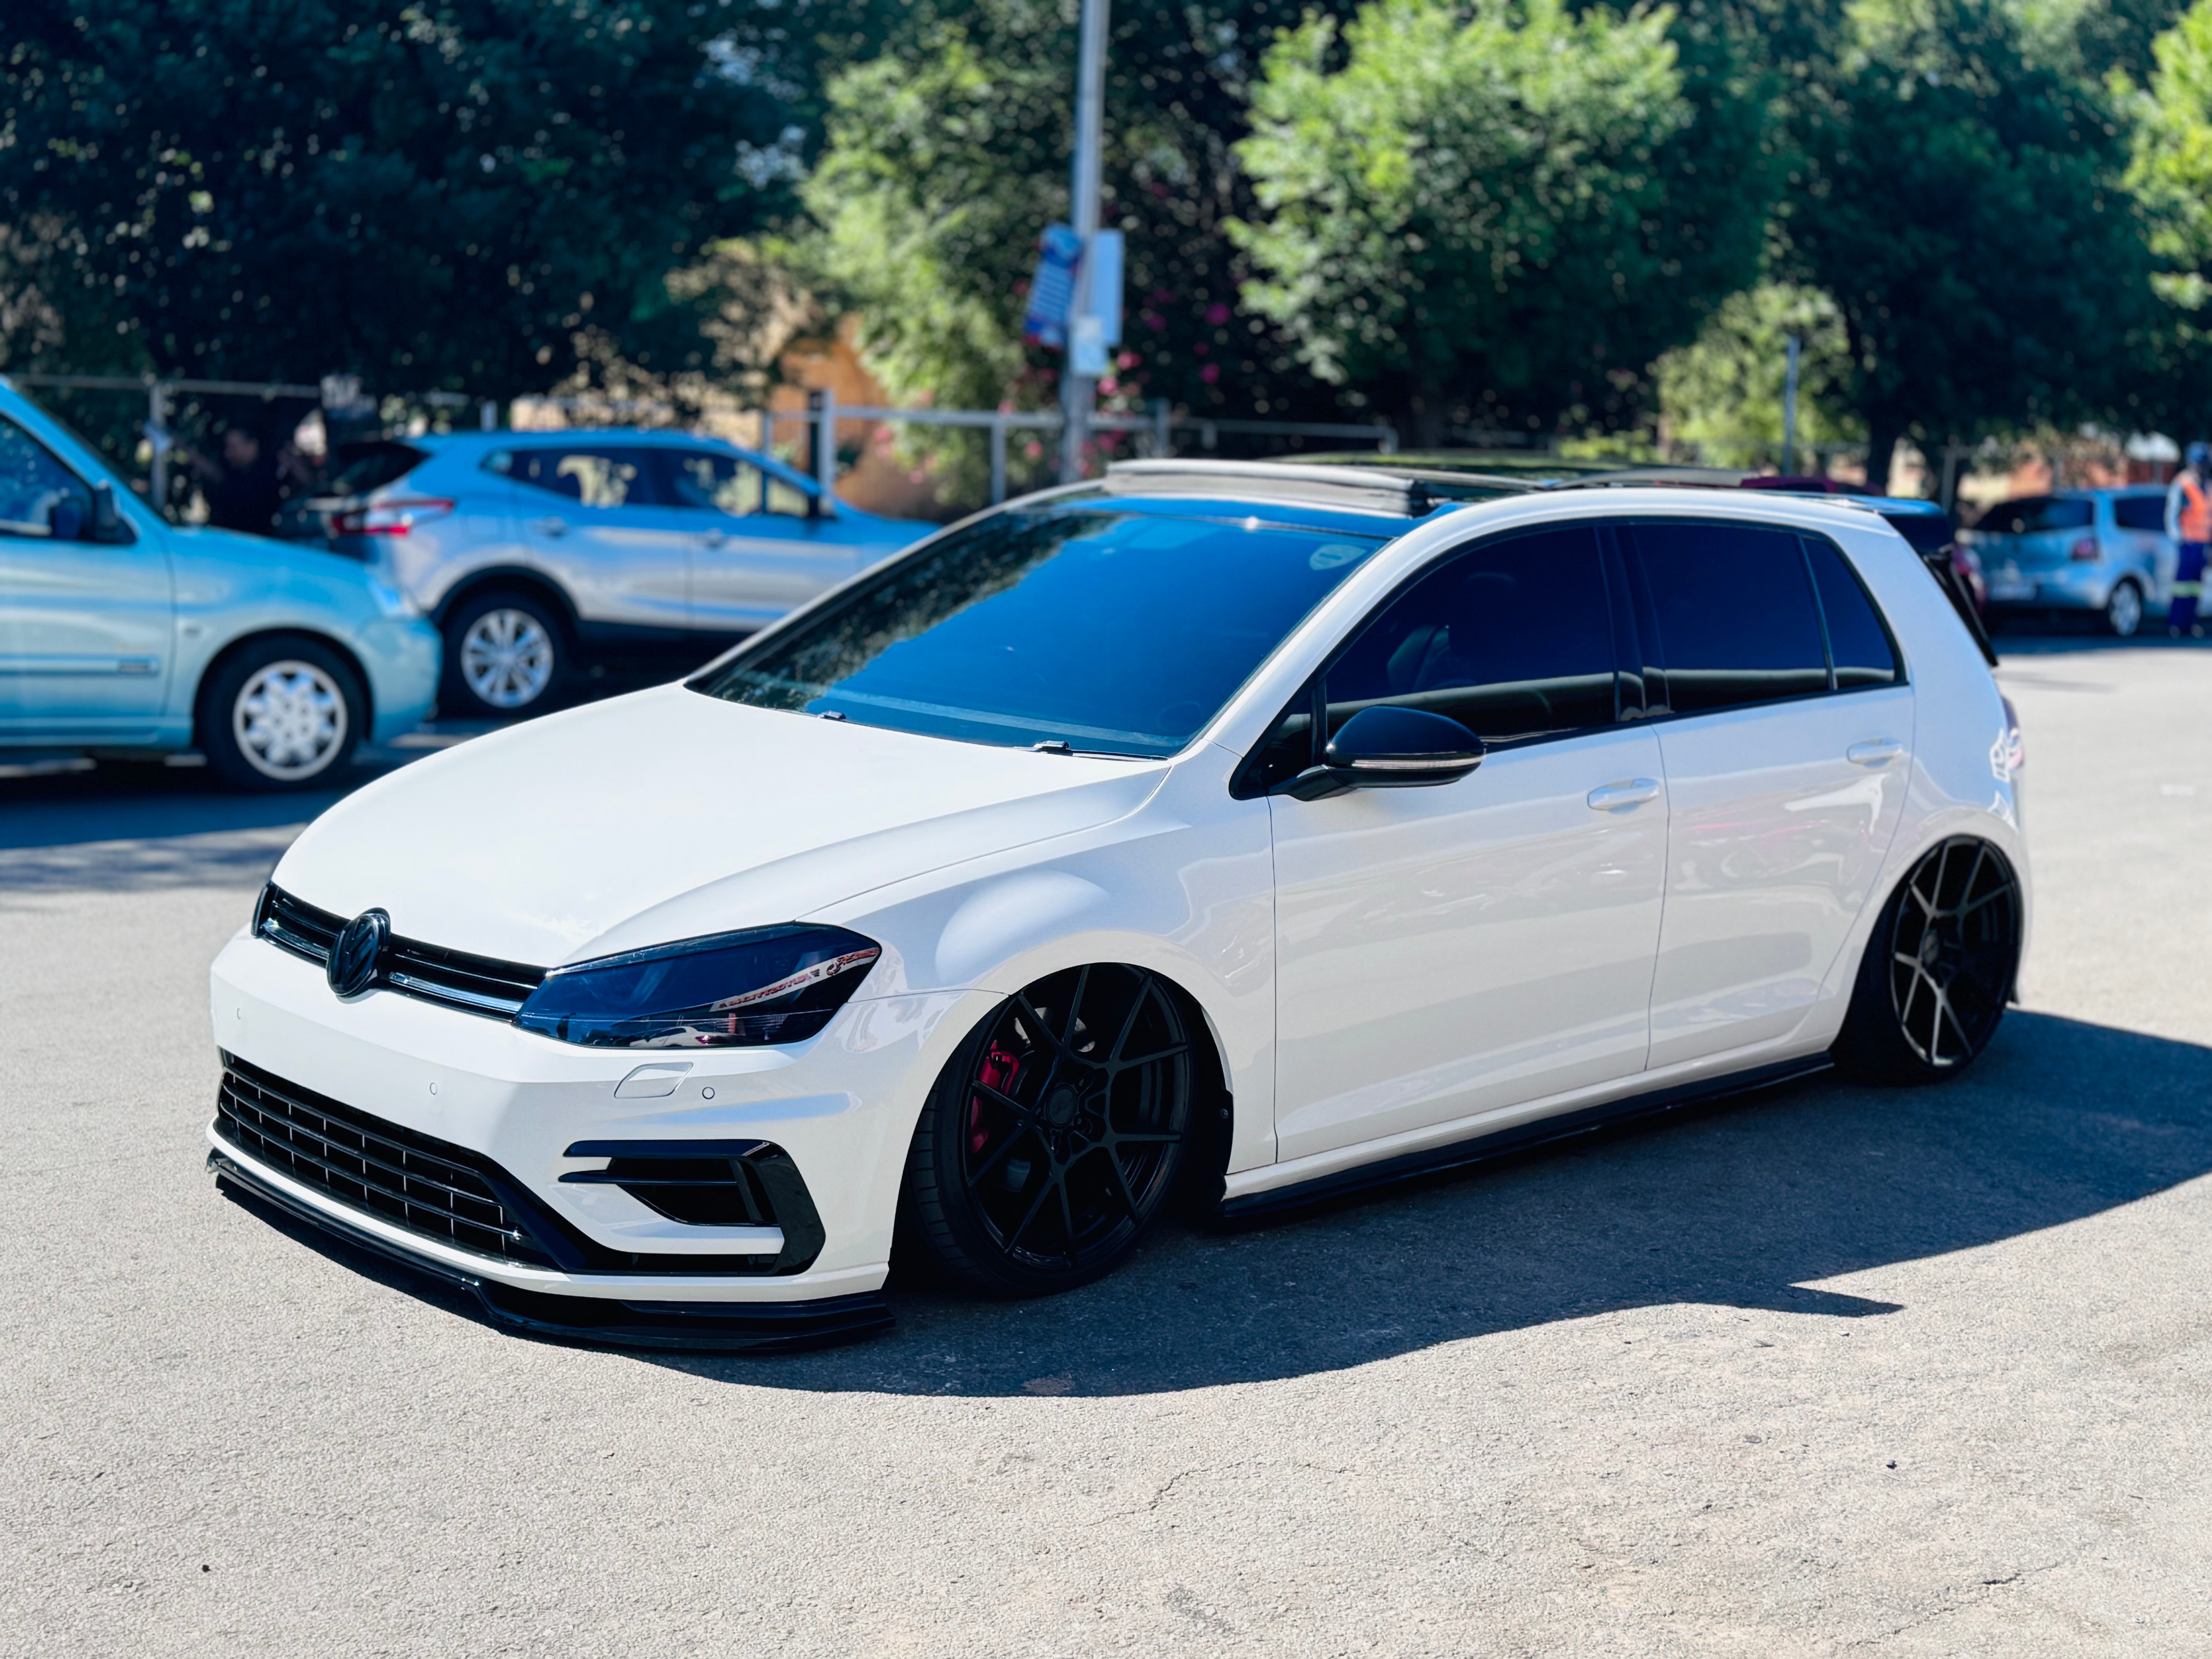 VW GOLF 7 to 7.5 R FRONT BUMPER UPGRADE